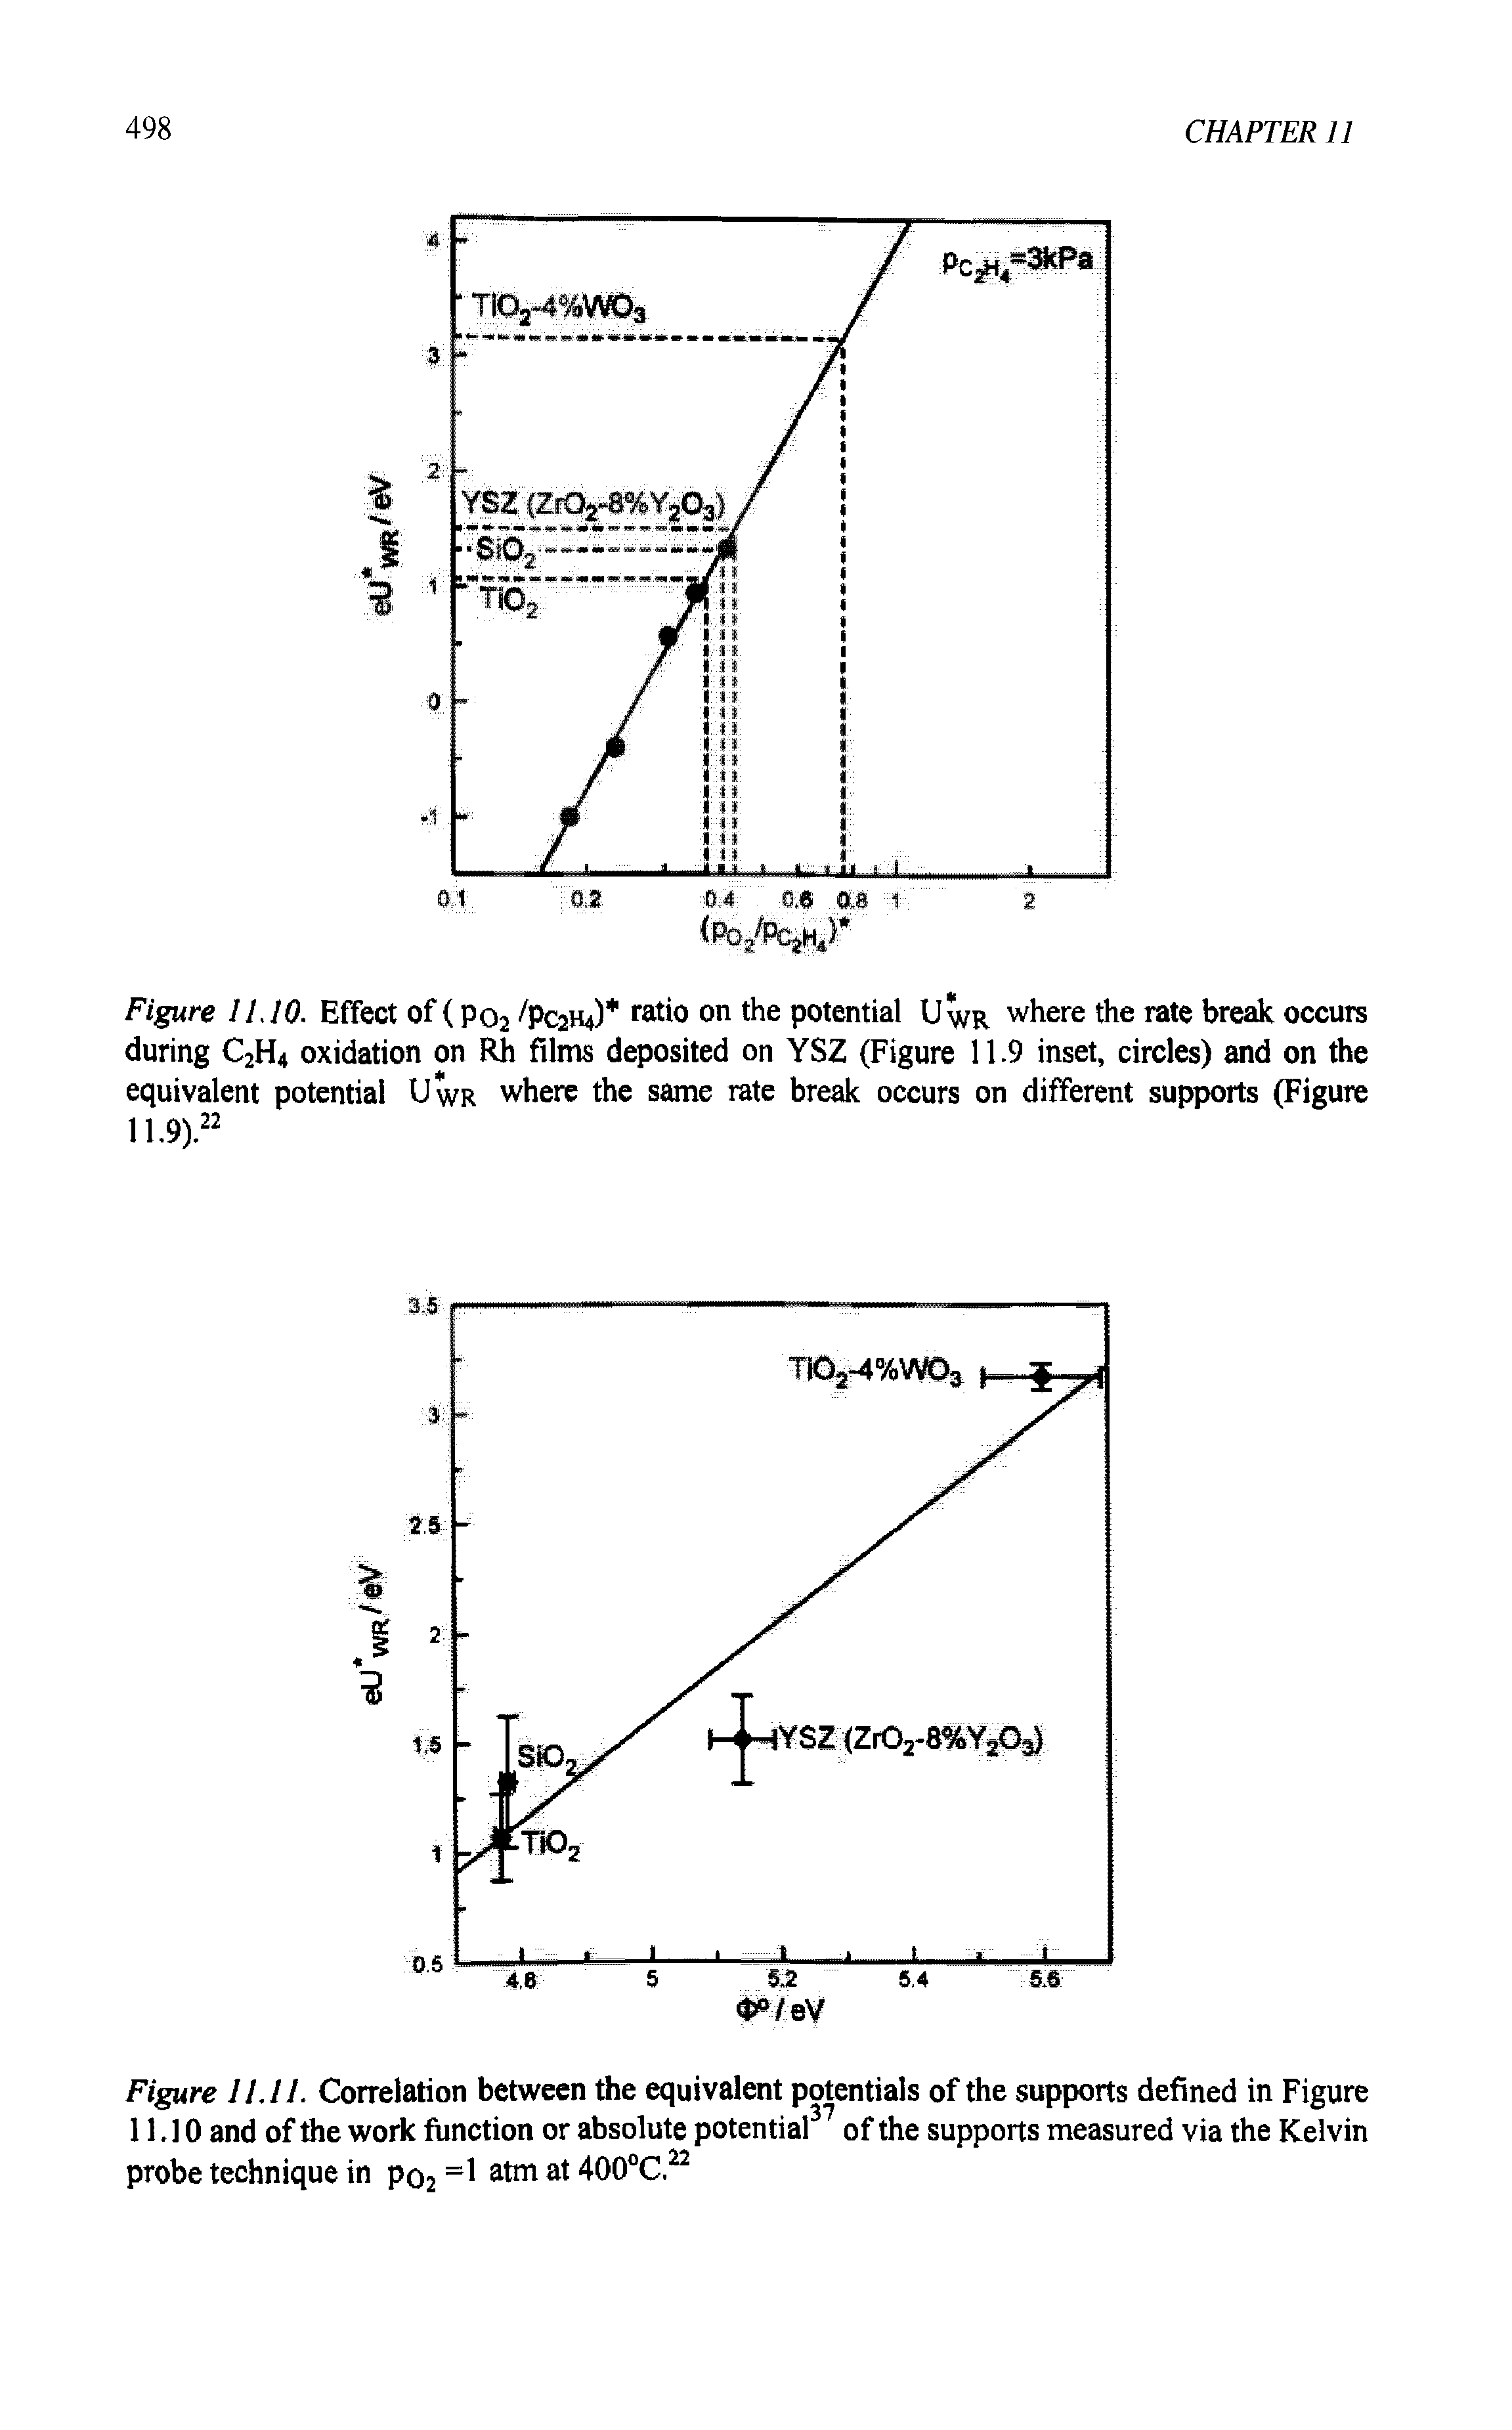 Figure 11.11. Correlation between the equivalent potentials of the supports defined in Figure 11.10 and of the work function or absolute potential of the supports measured via the Kelvin probe technique in po2 =1 atm at 400°C.22...